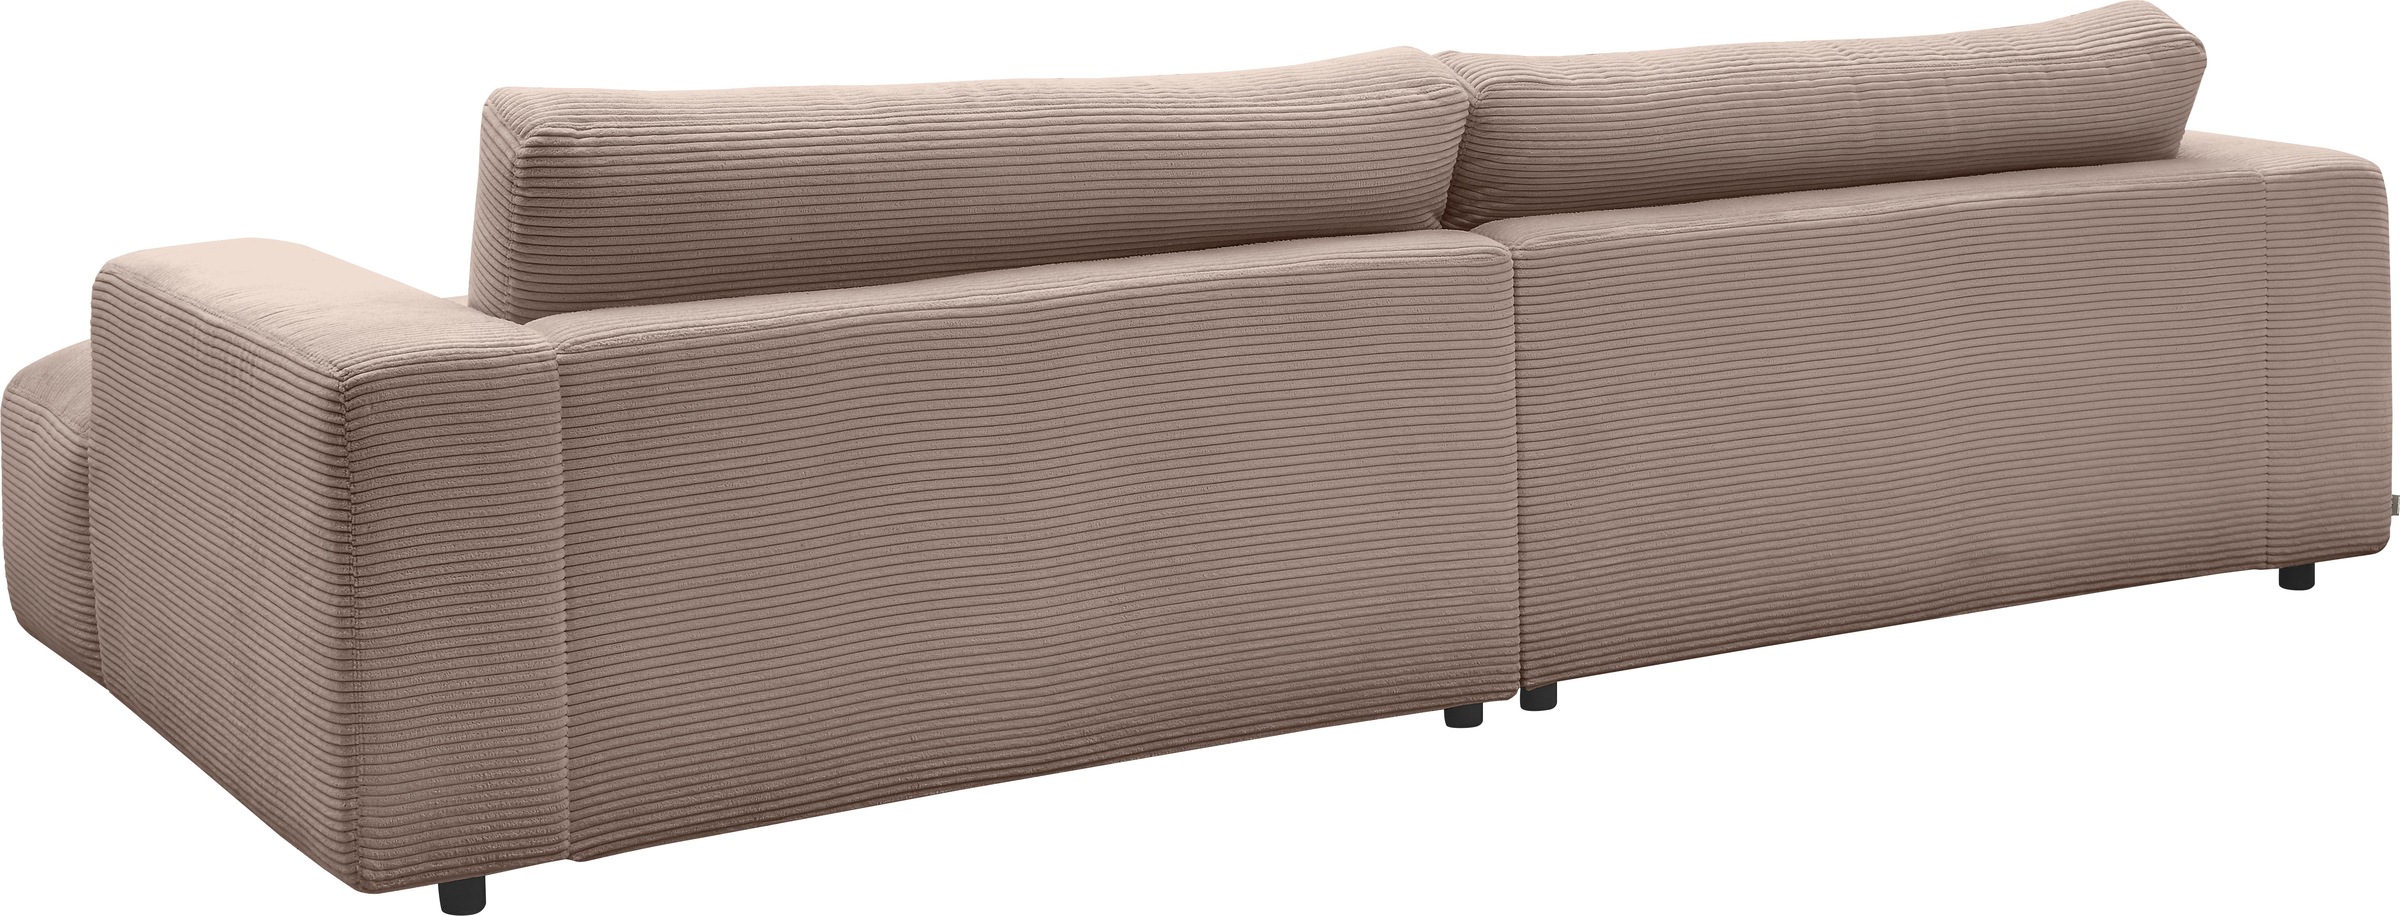 branded Loungesofa OTTO M »Lucia«, Breite by cm Online GALLERY Shop Musterring Cord-Bezug, 292